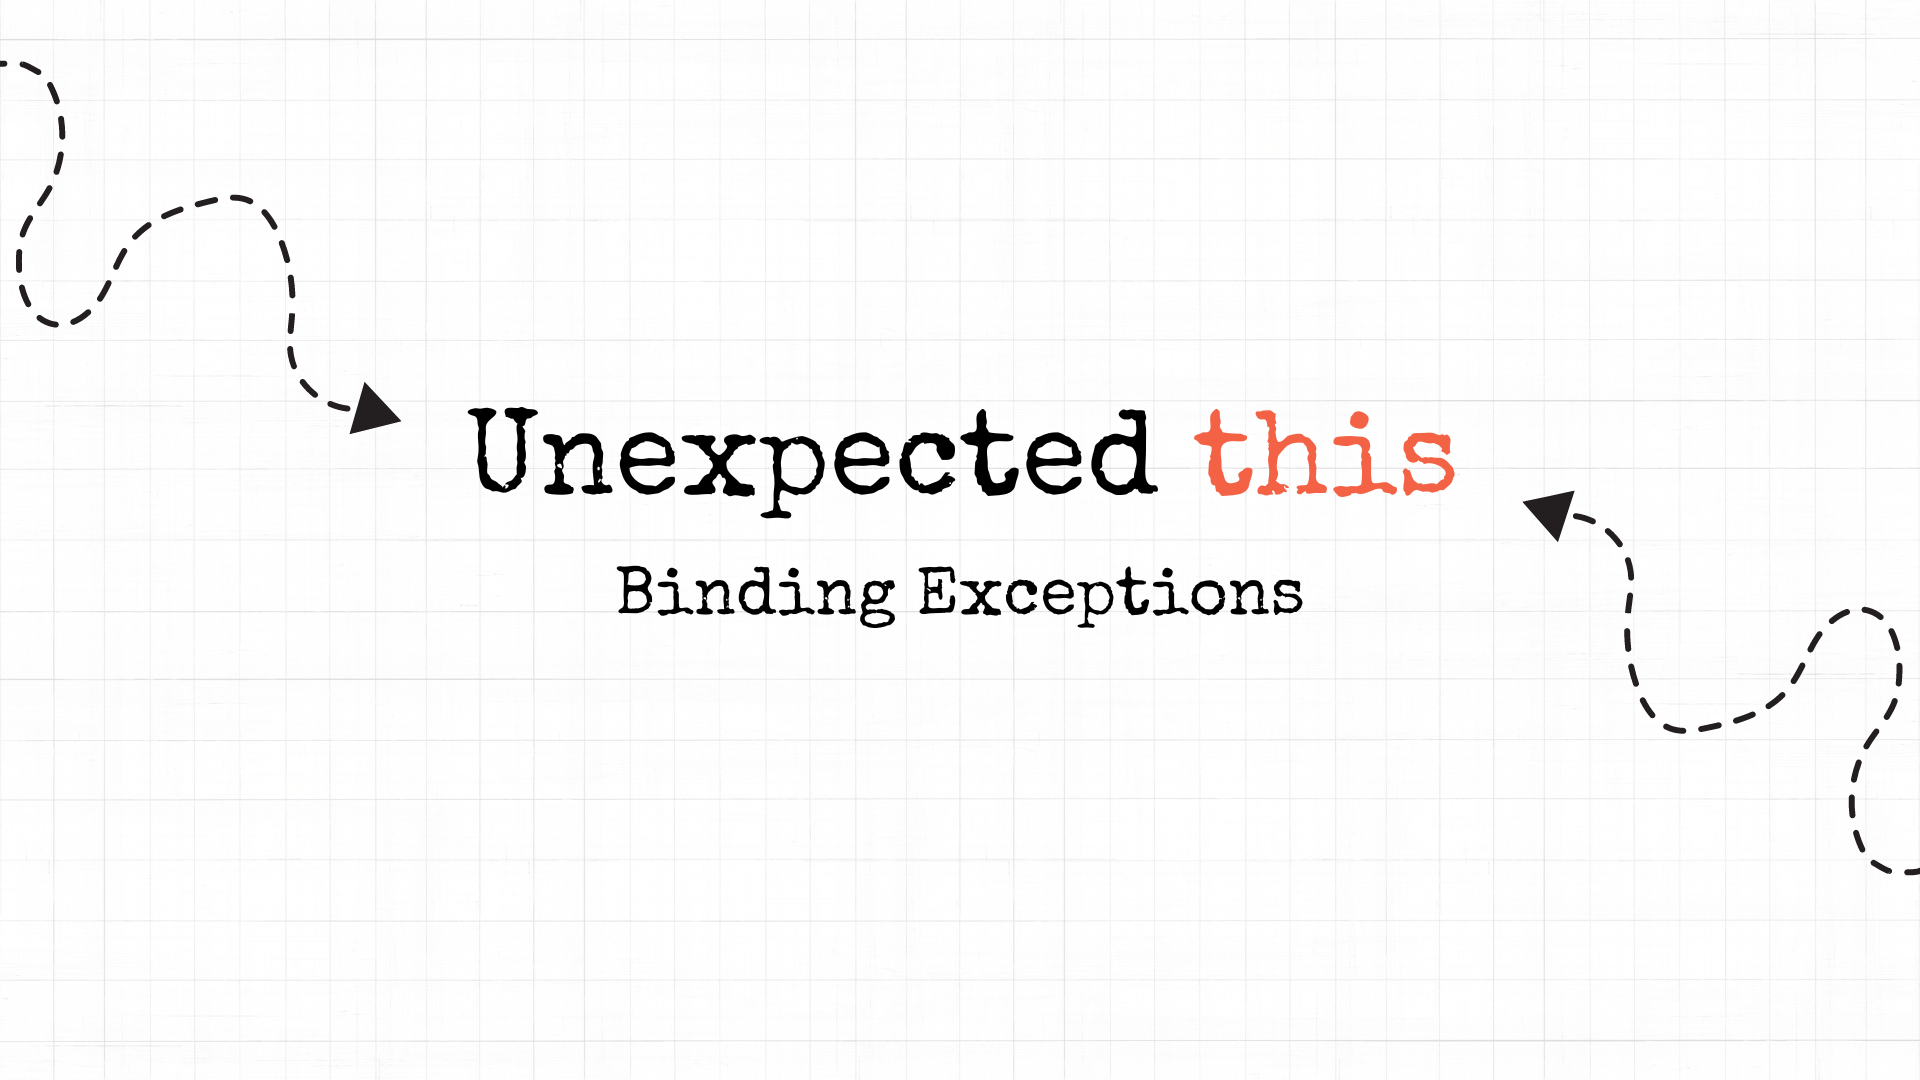 Unexpected this: Binding Exceptions